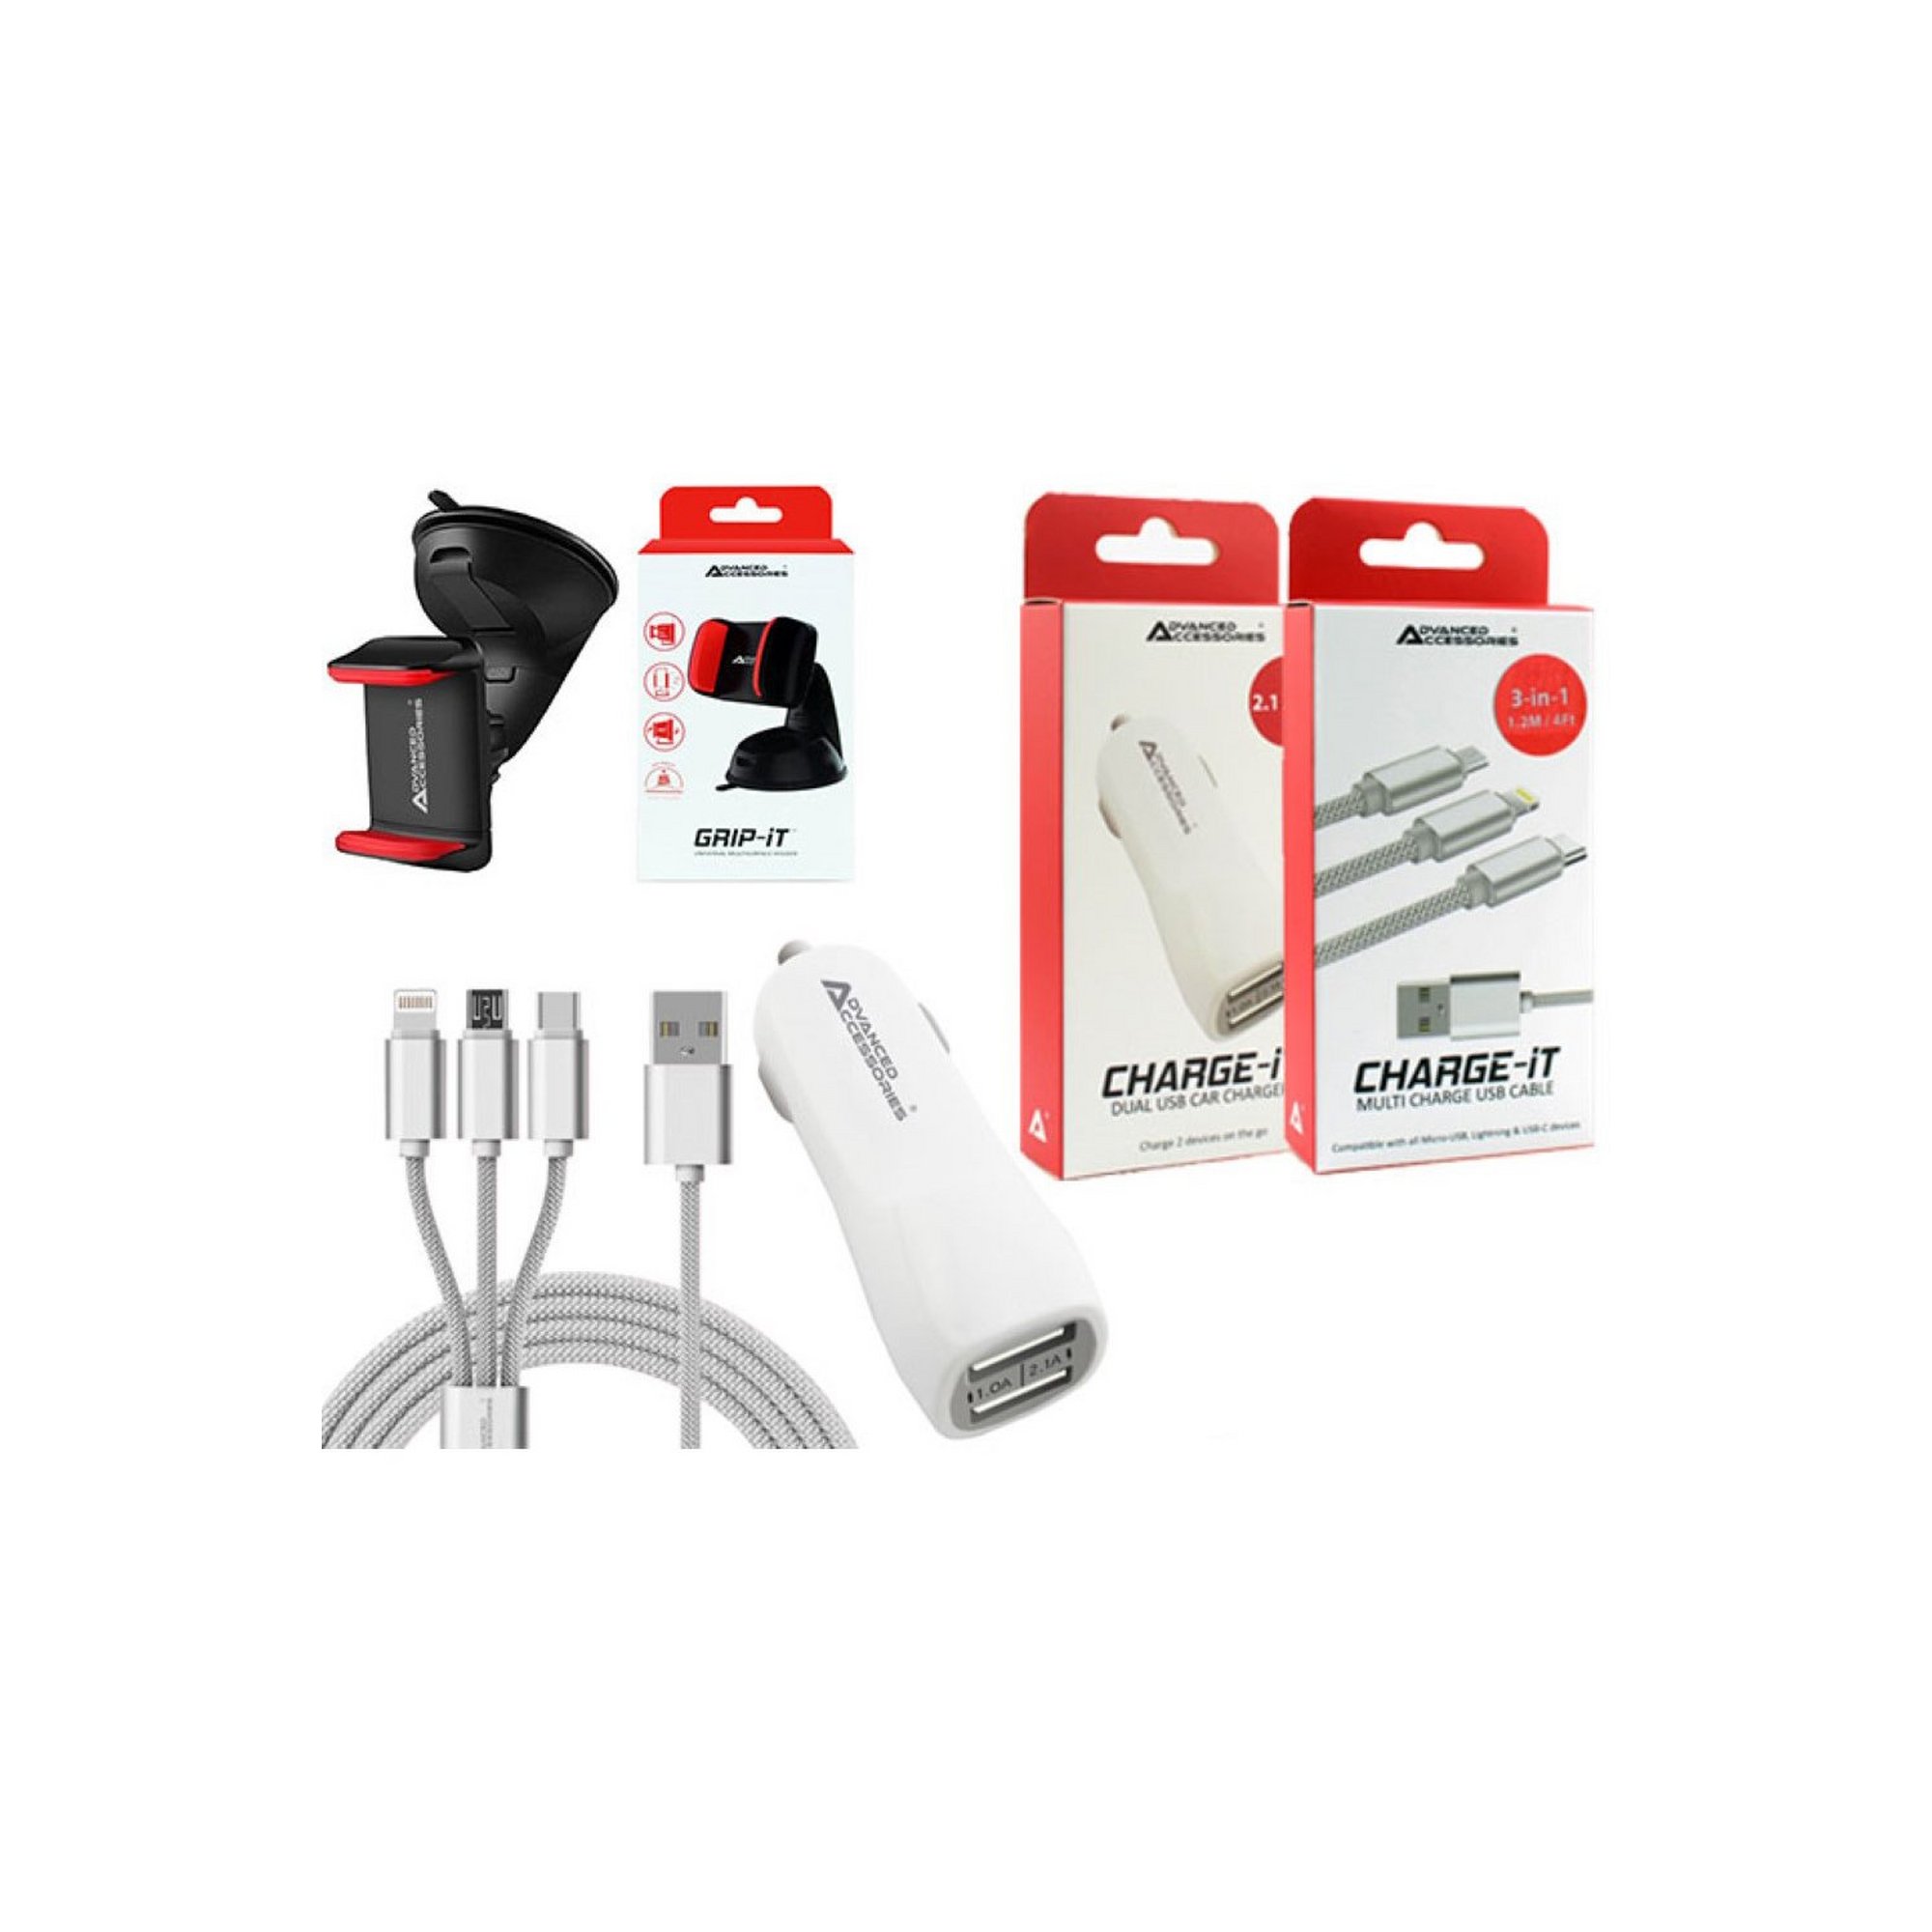 Advanced Accessories In Car Complete Bundle with Charger and Holder